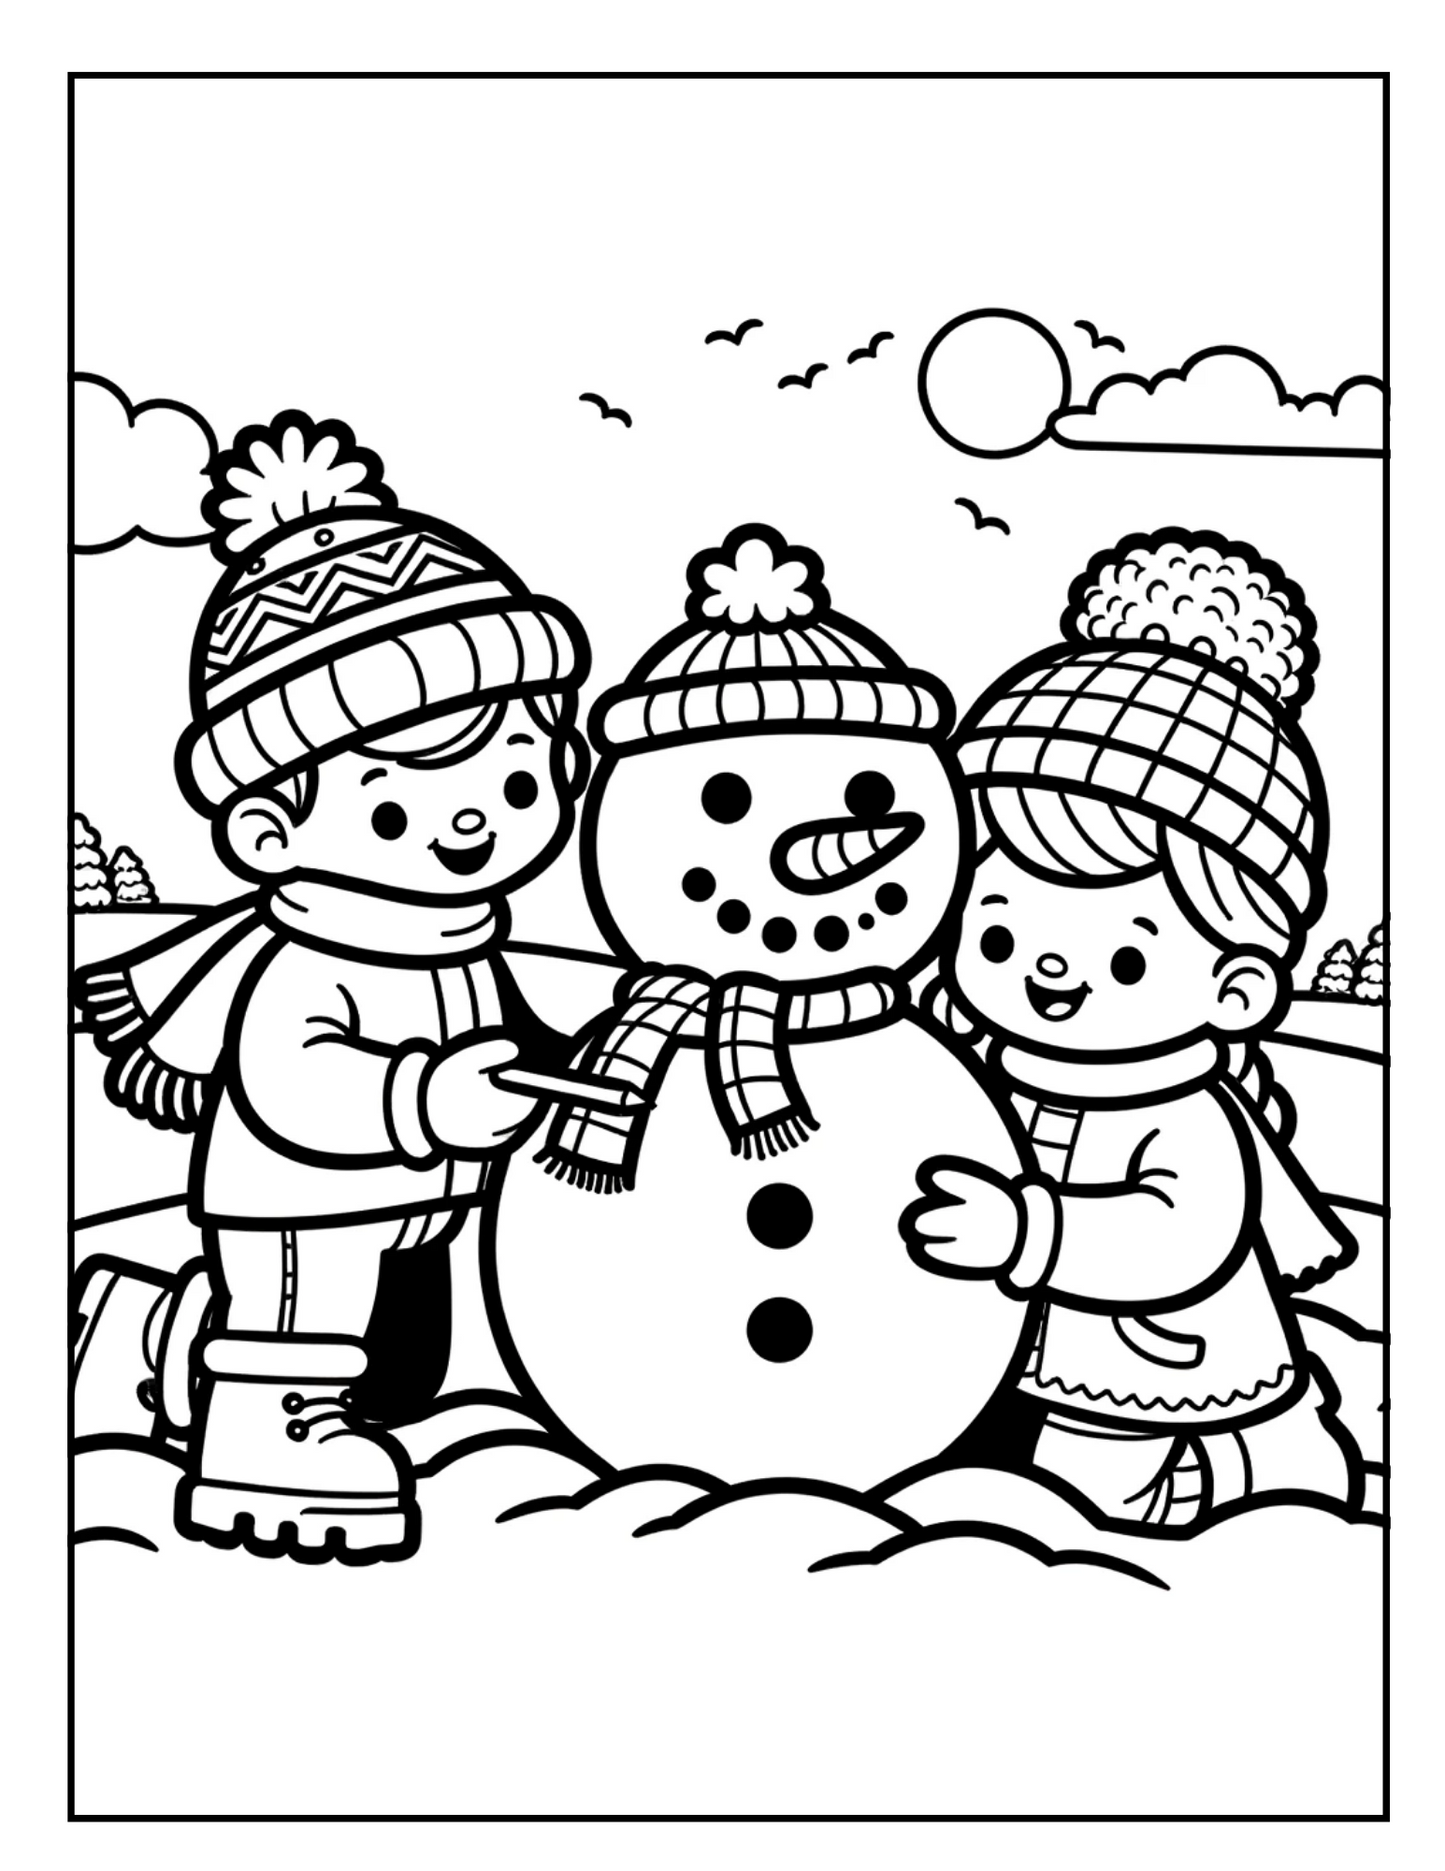 FREE Kids Building Snowman Coloring Page – Curious Learners Academy